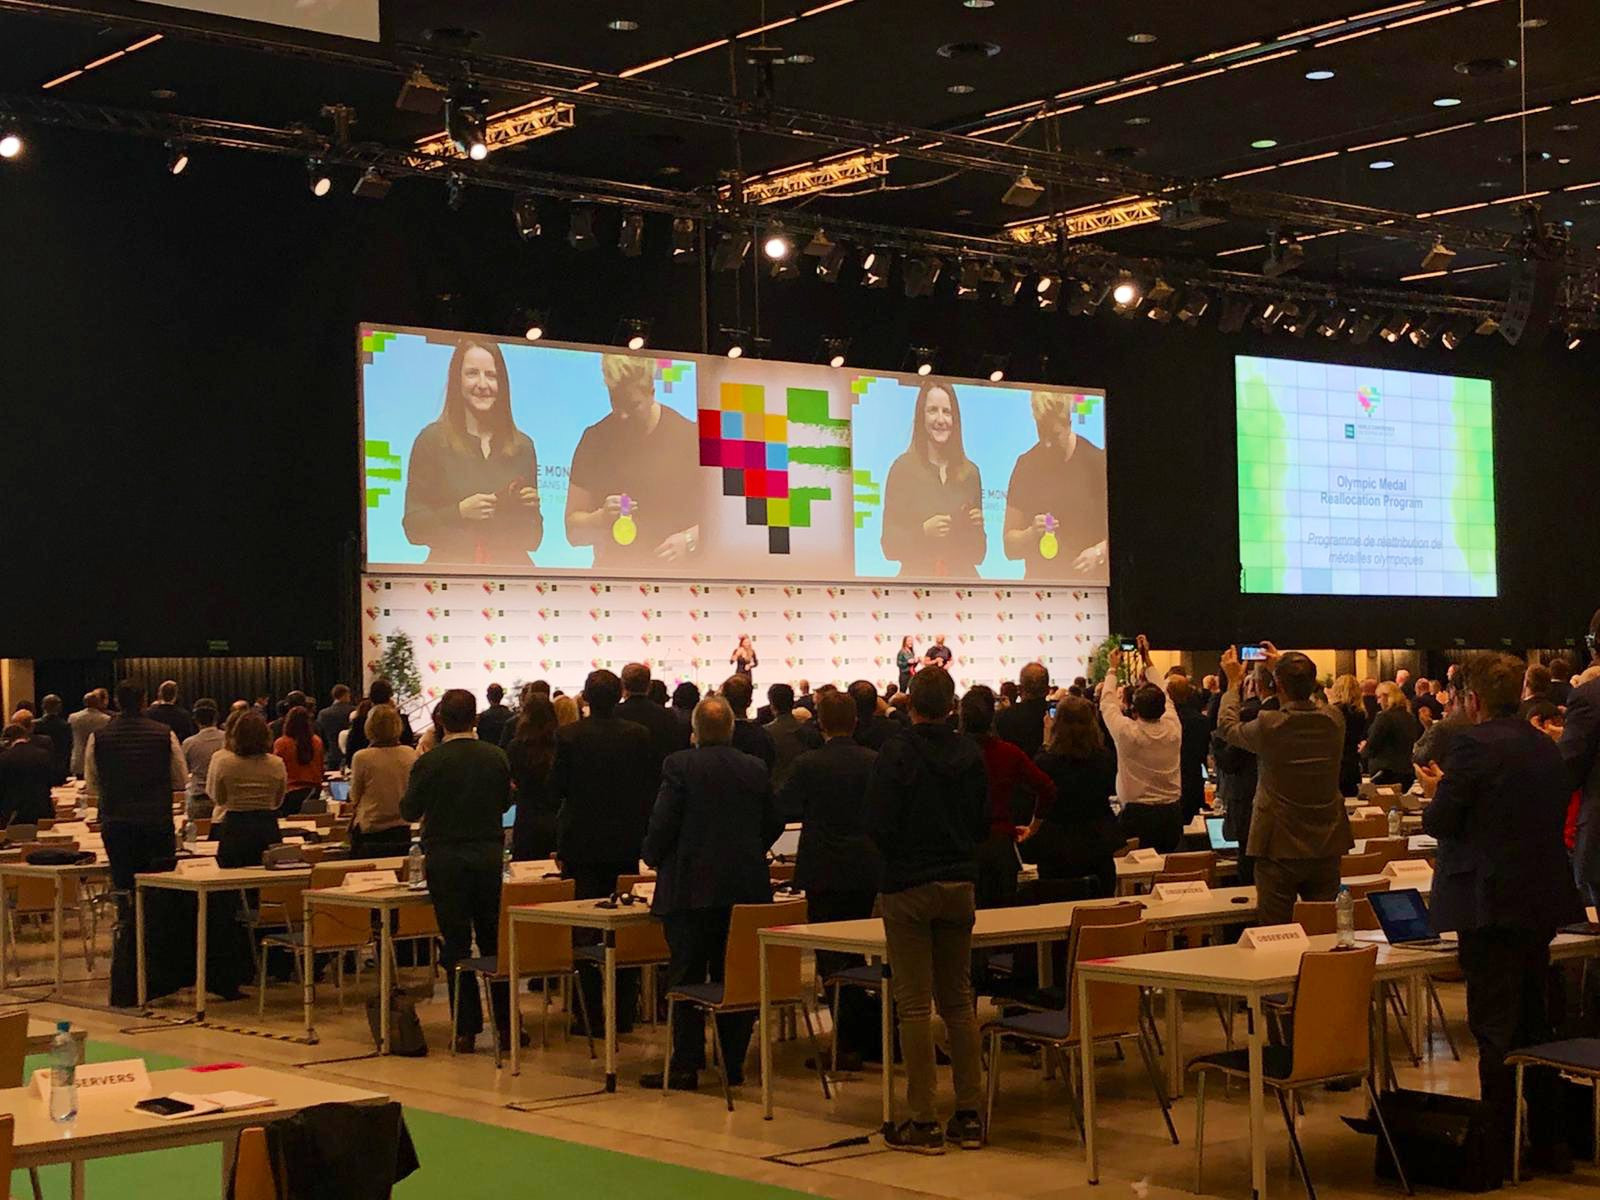 At the end, Sayers and Wlodarczyk received a standing ovation from delegates the World Conference on Doping in Sport ©Twitter